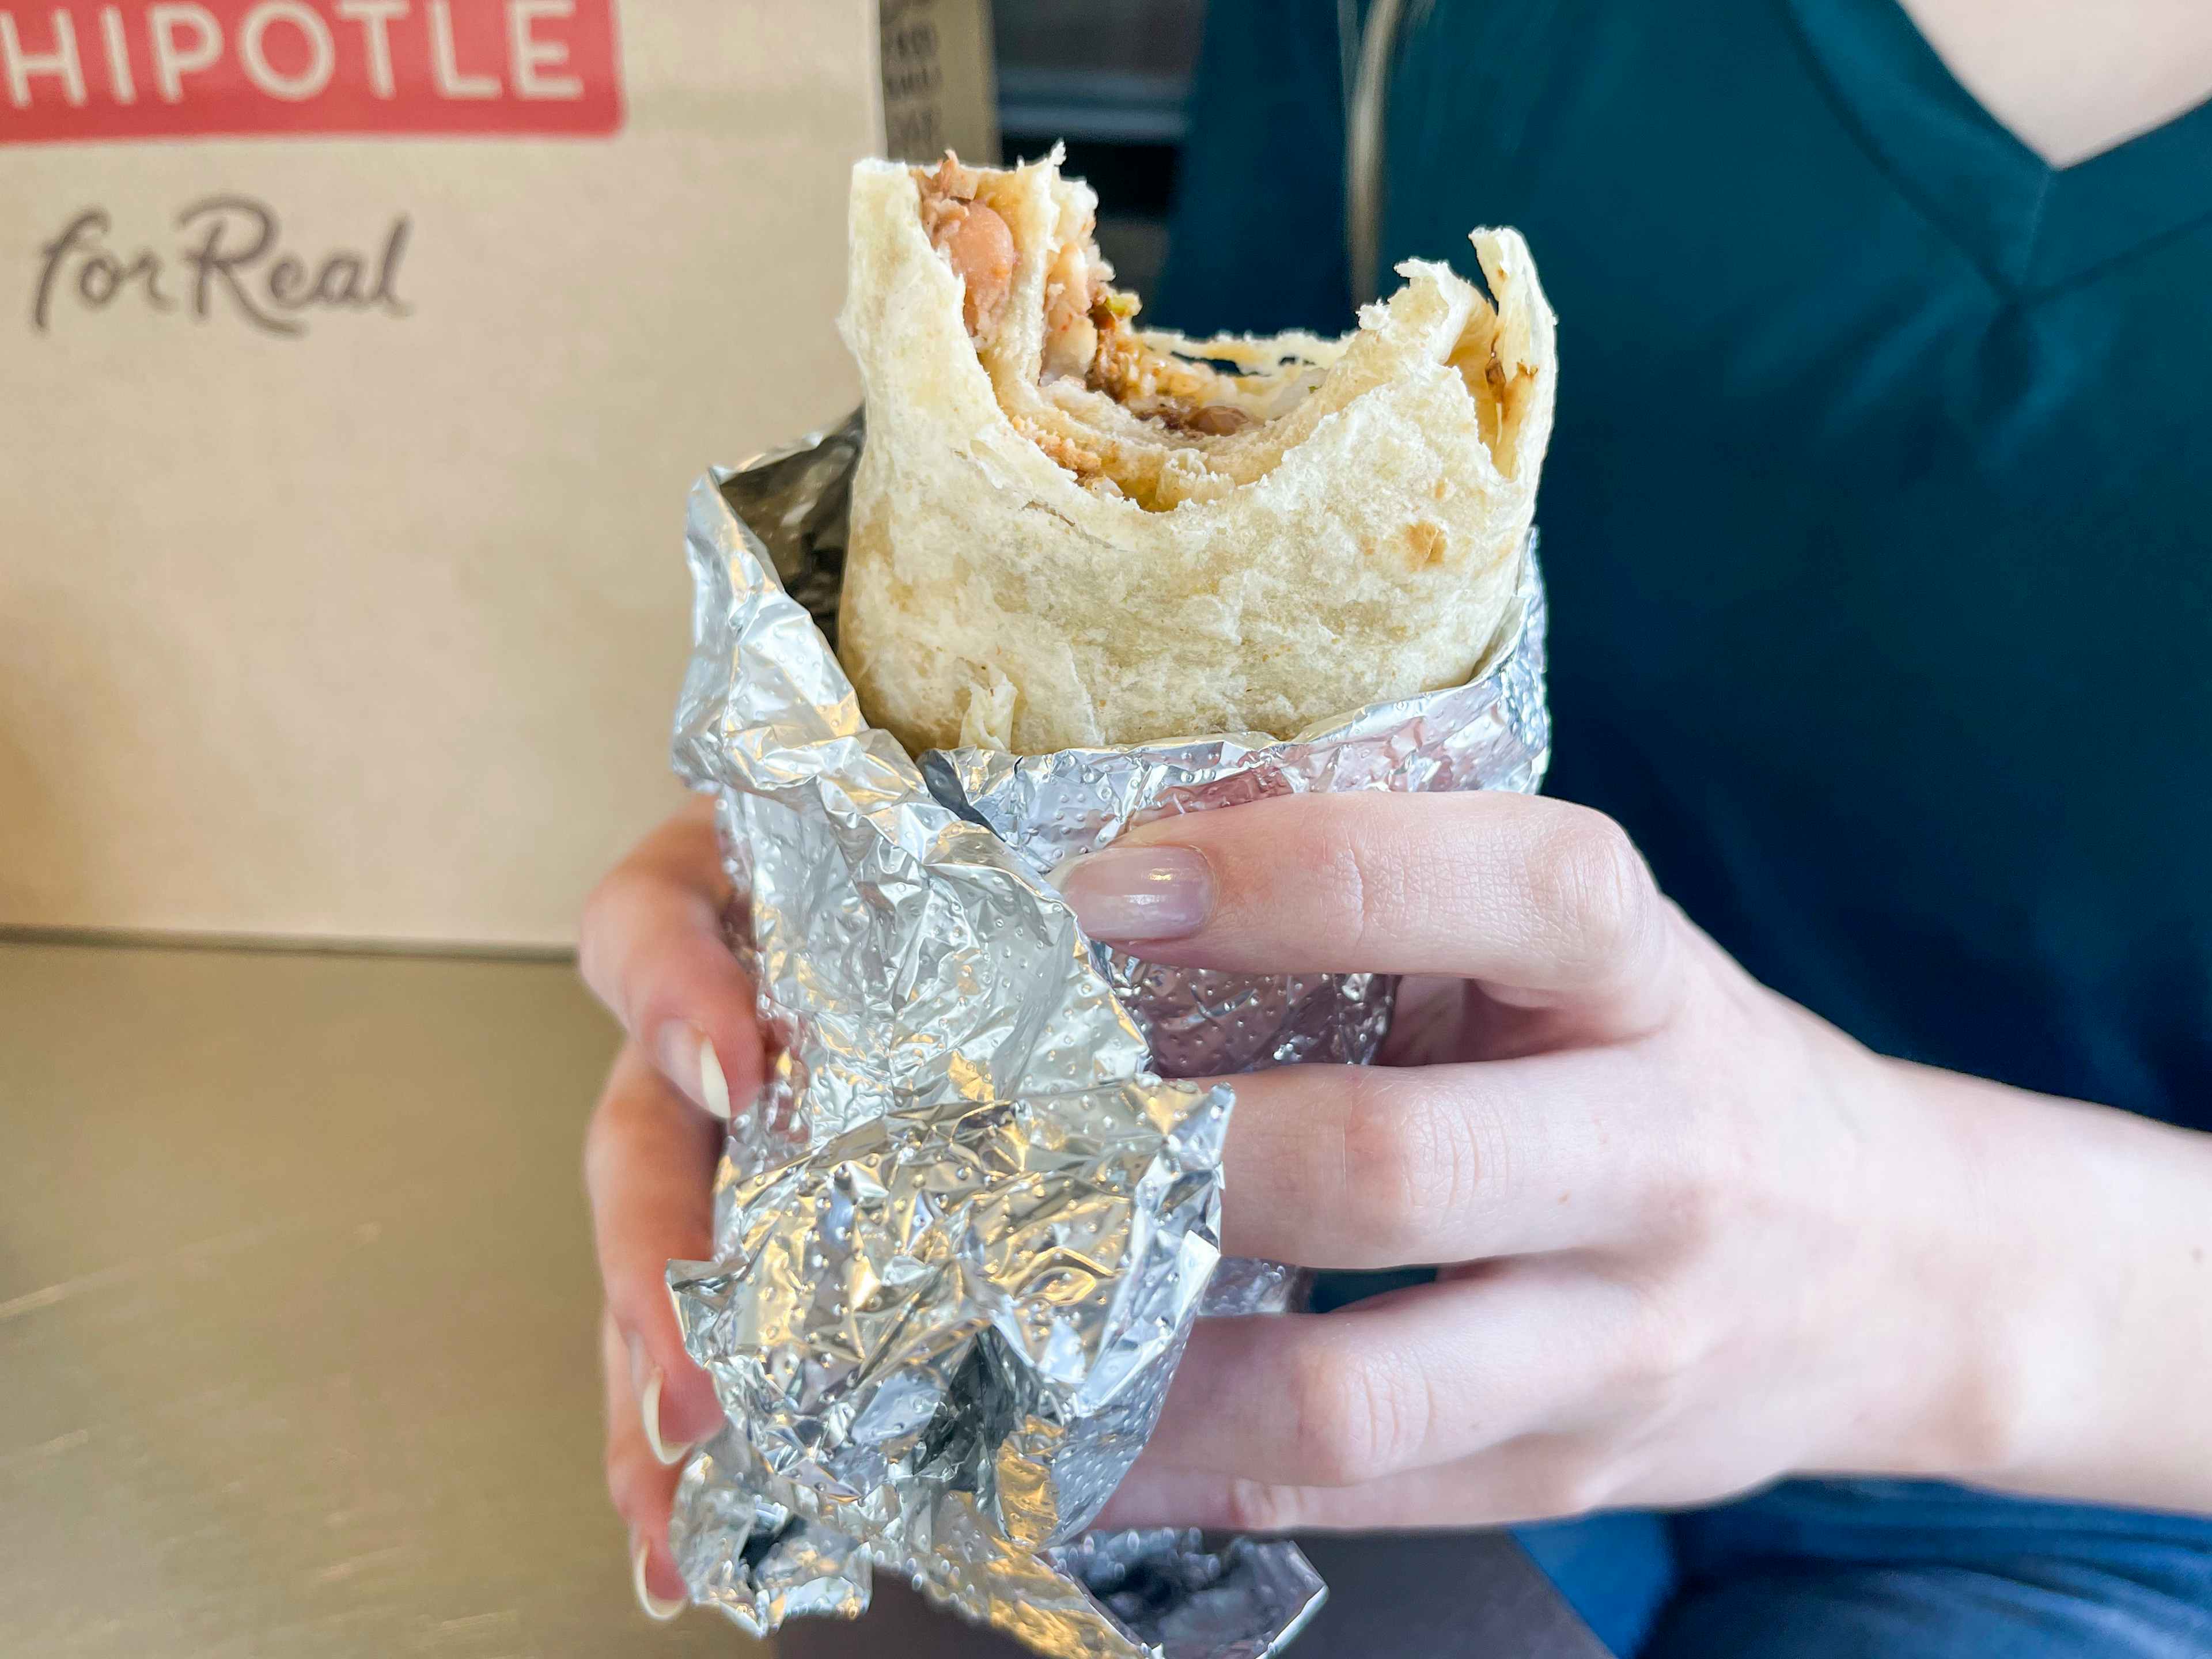 A person holding a burrito that has bitten into. The beans chicken and rice are visible inside.